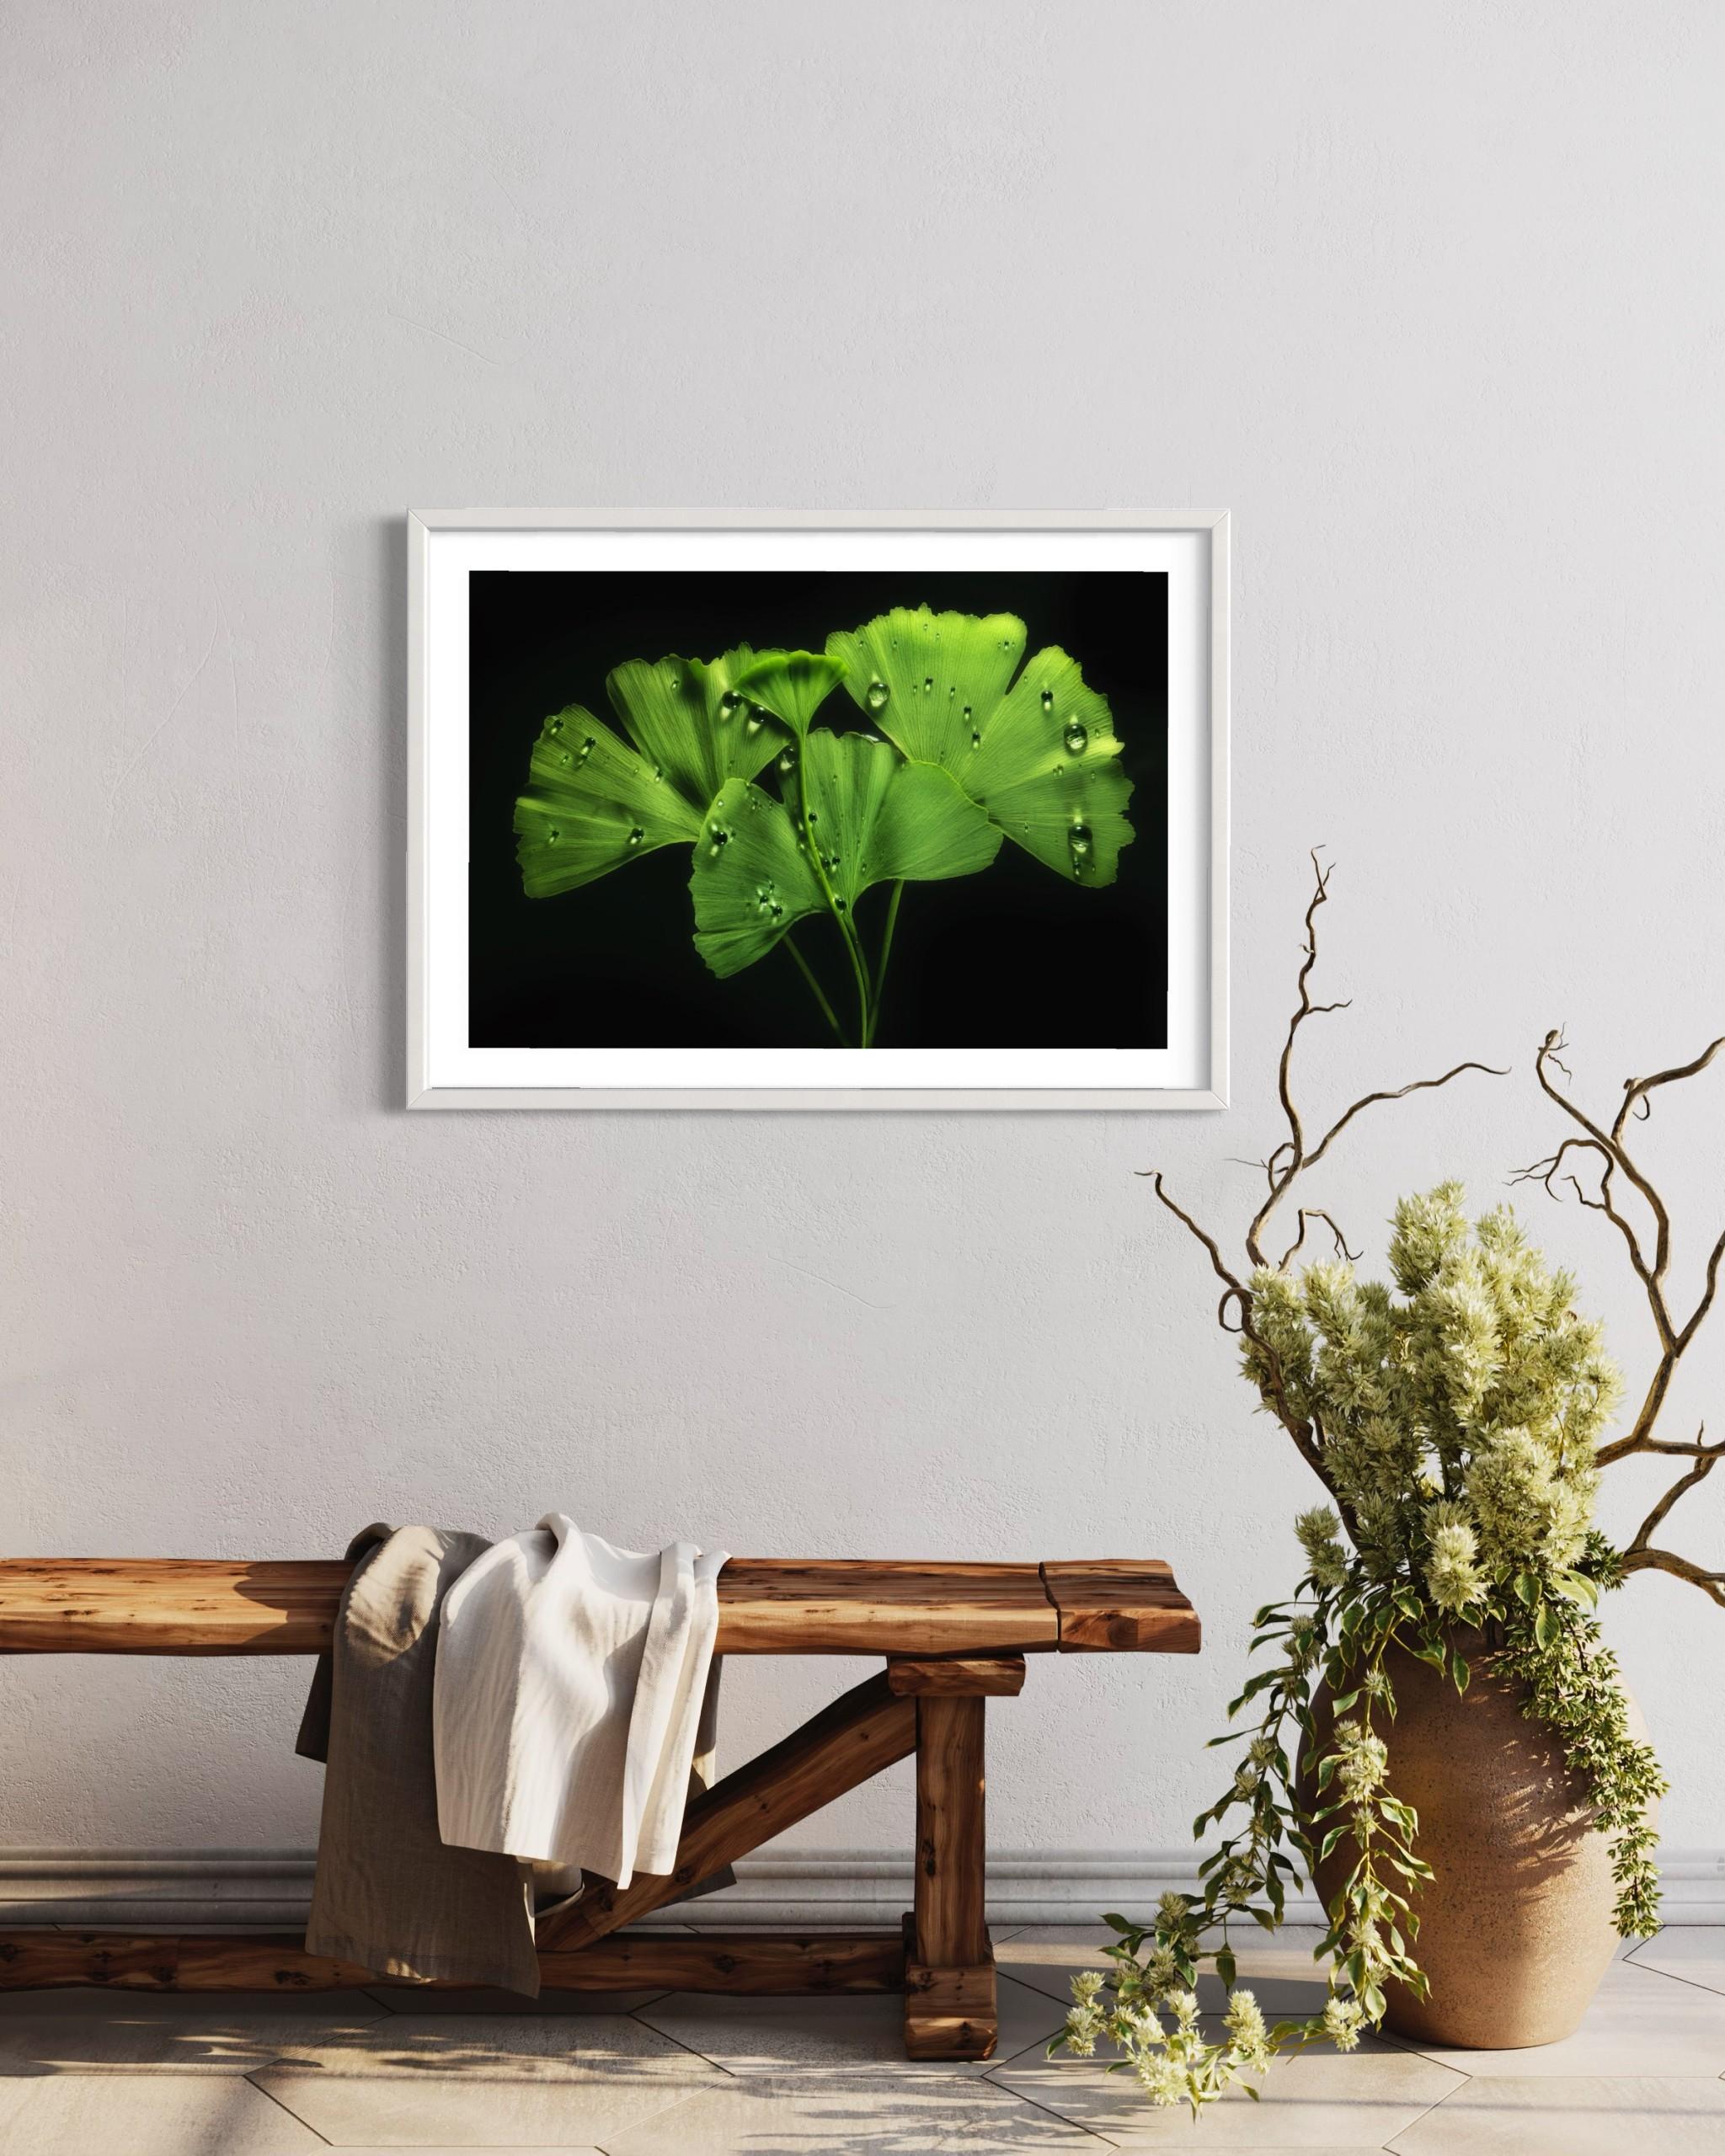 Ginko Biloba No. 1, floral photography, limited edition print, green art For Sale 3